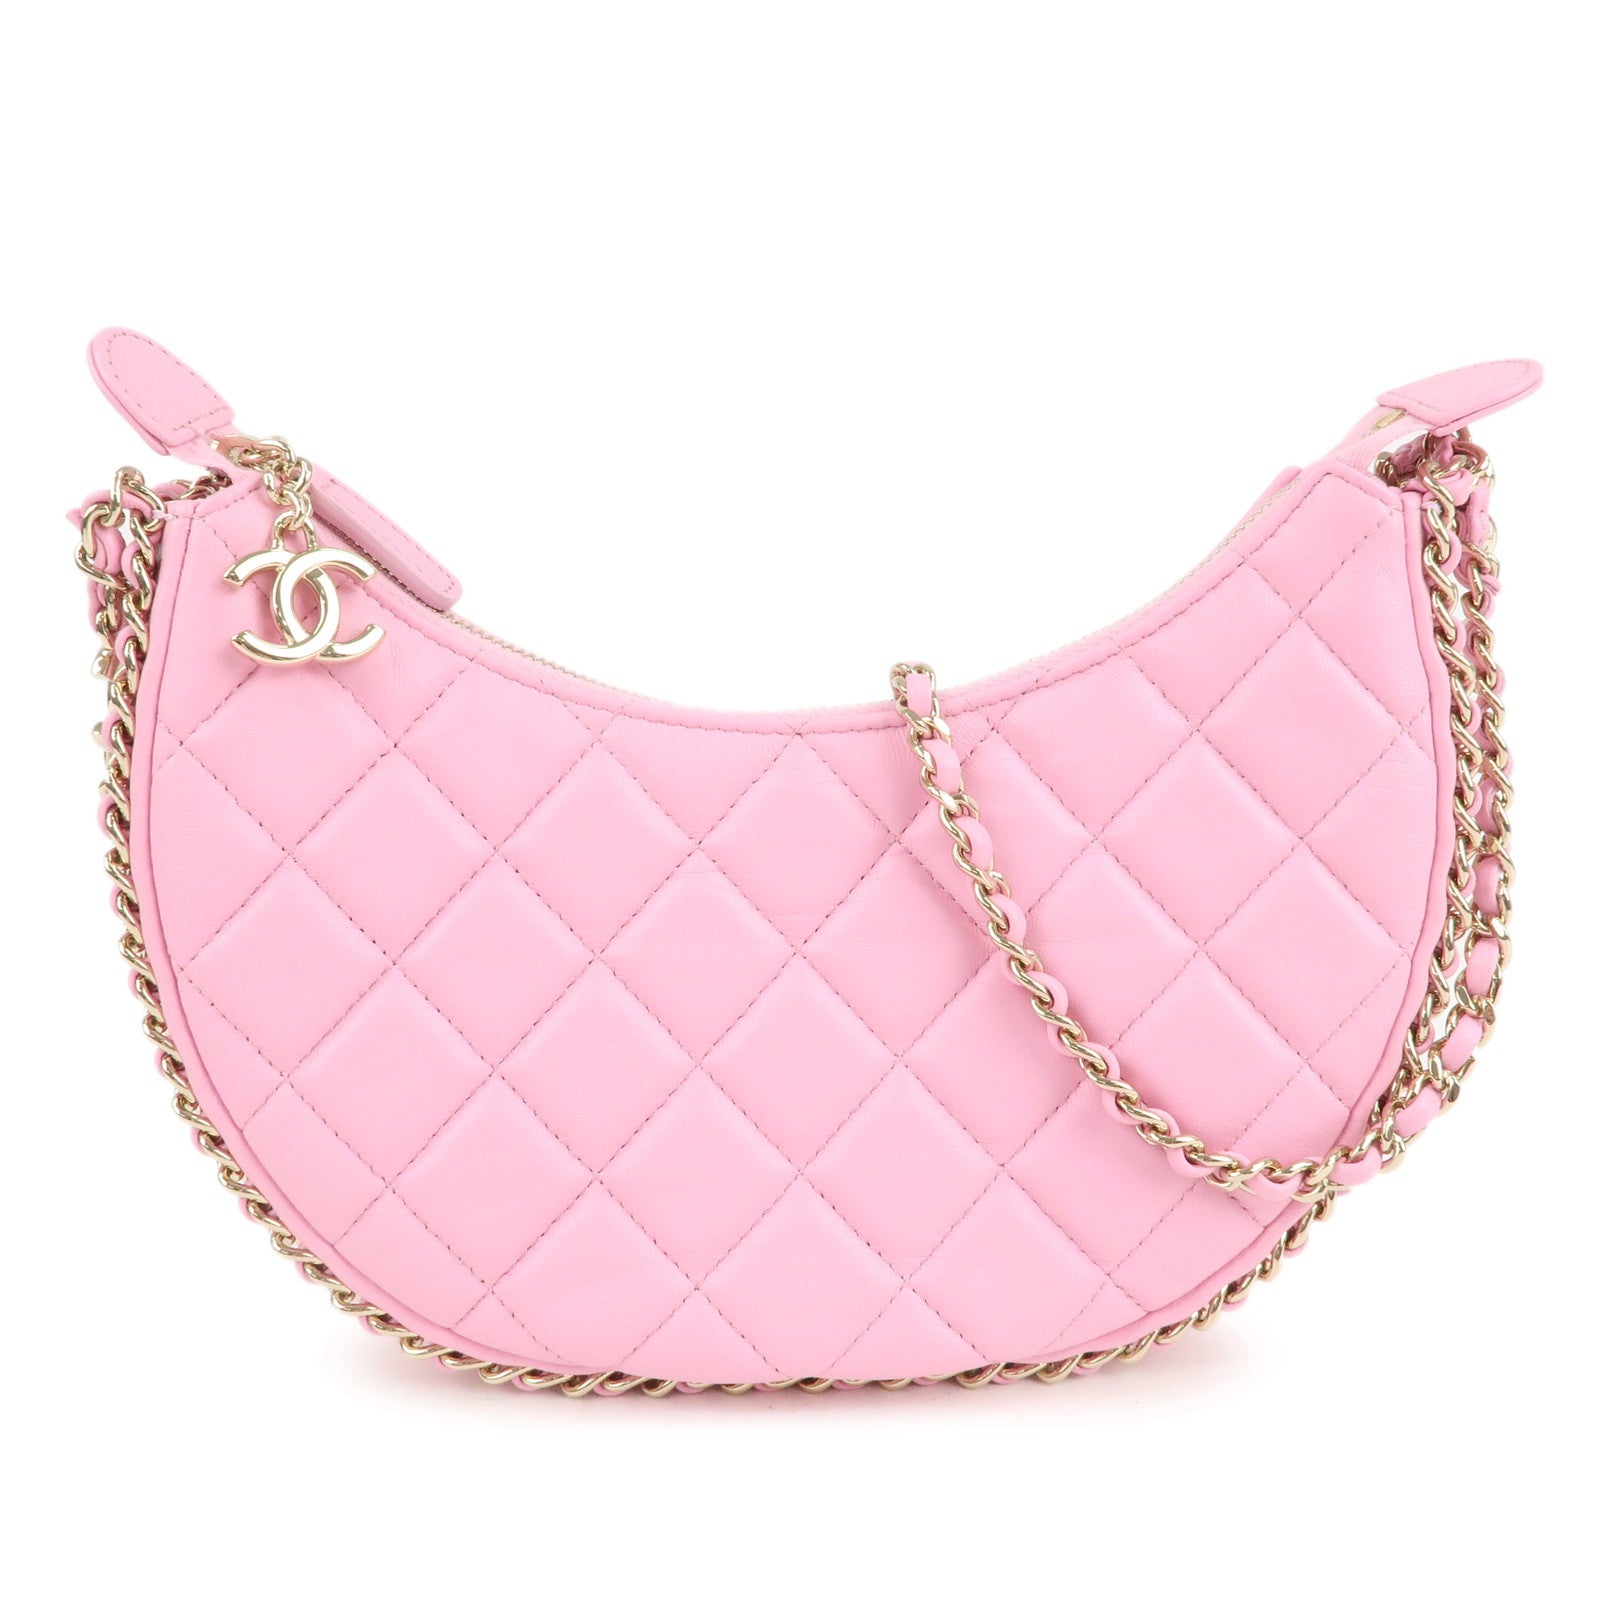 Chanel Small Hobo Bag AS3710 B10233 NM304 , Pink, One Size